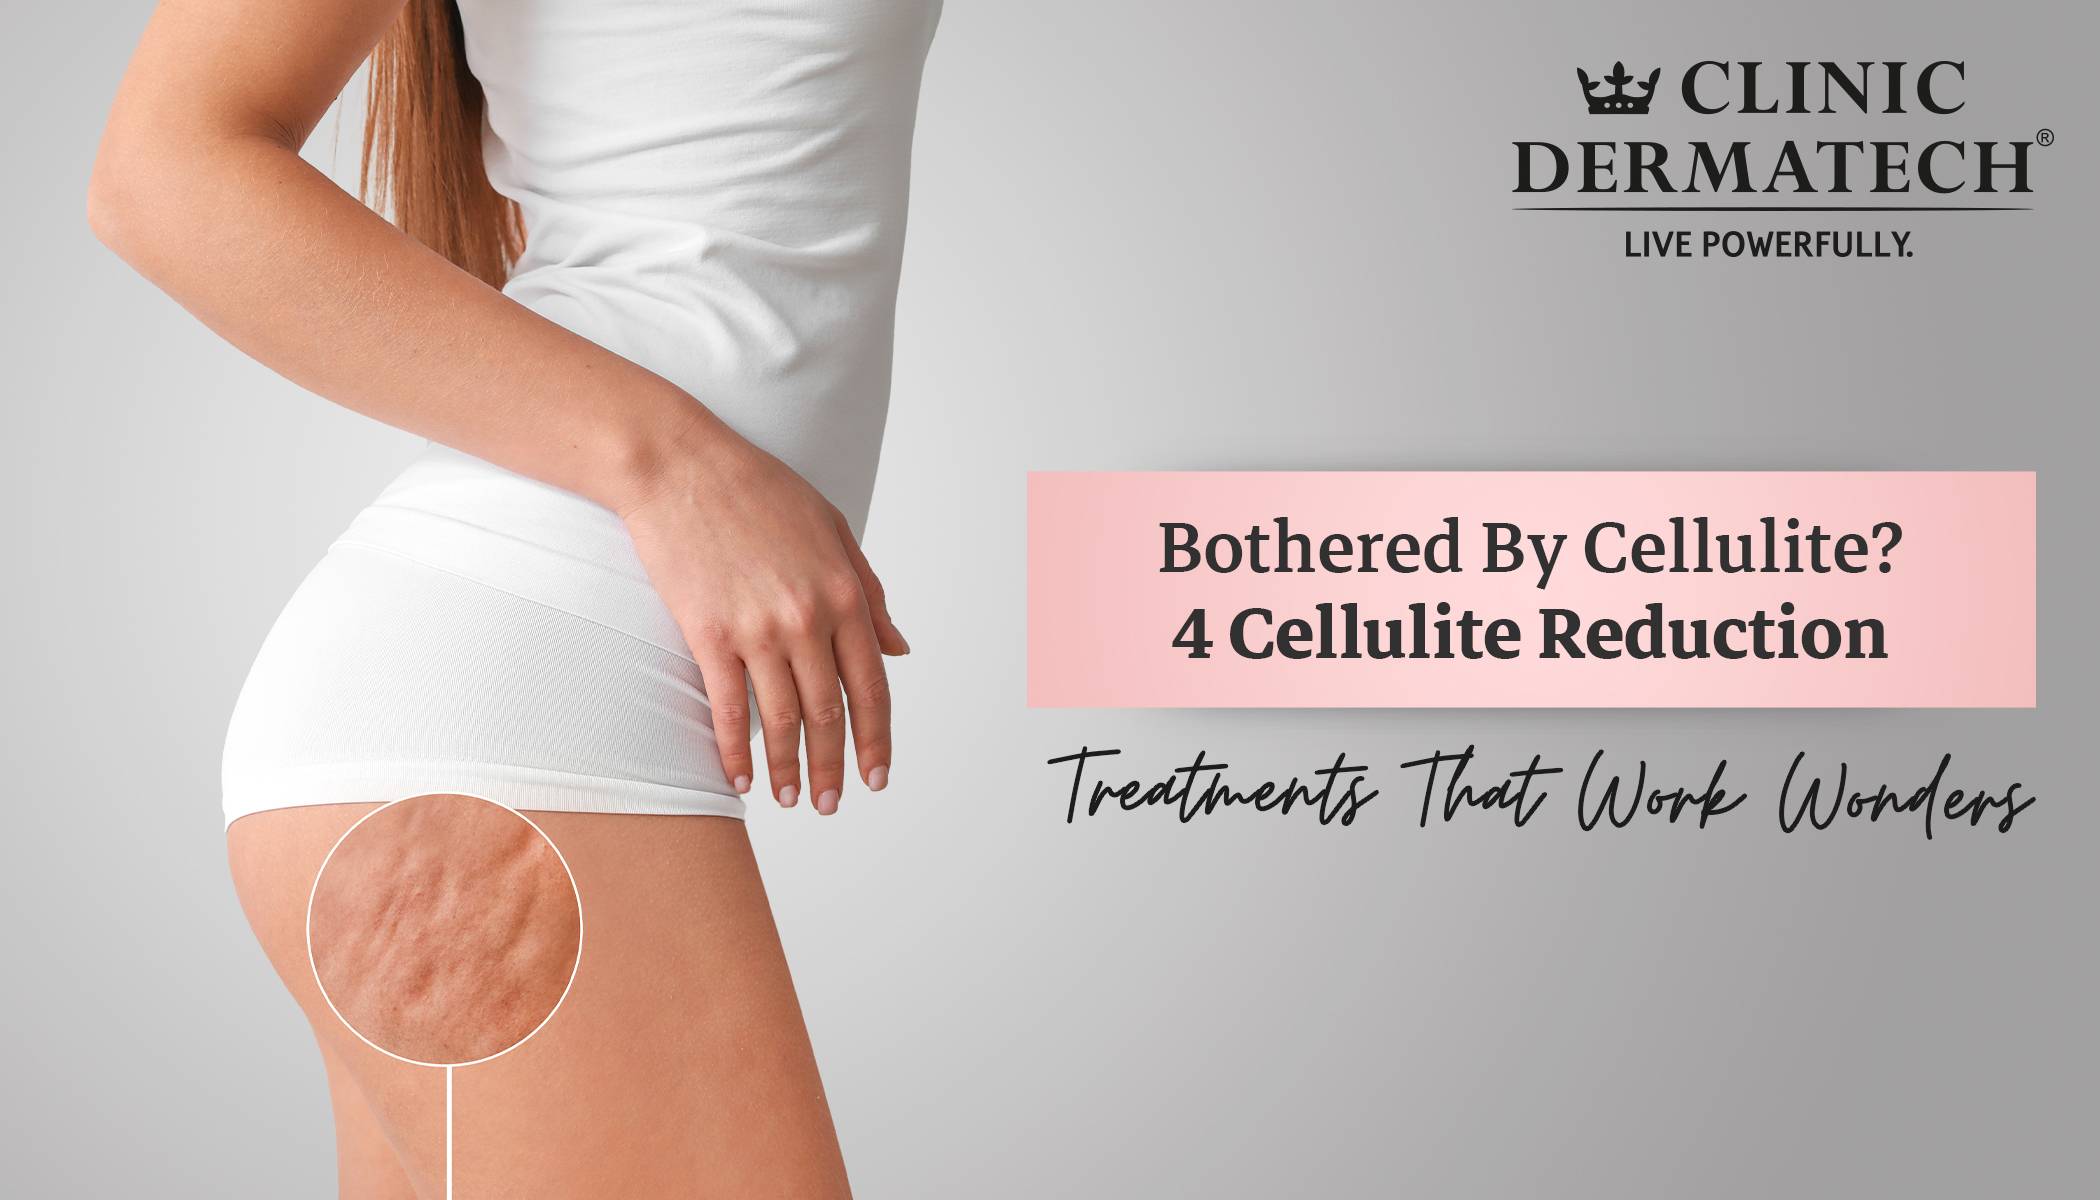 Cellulite reduction treatments that work